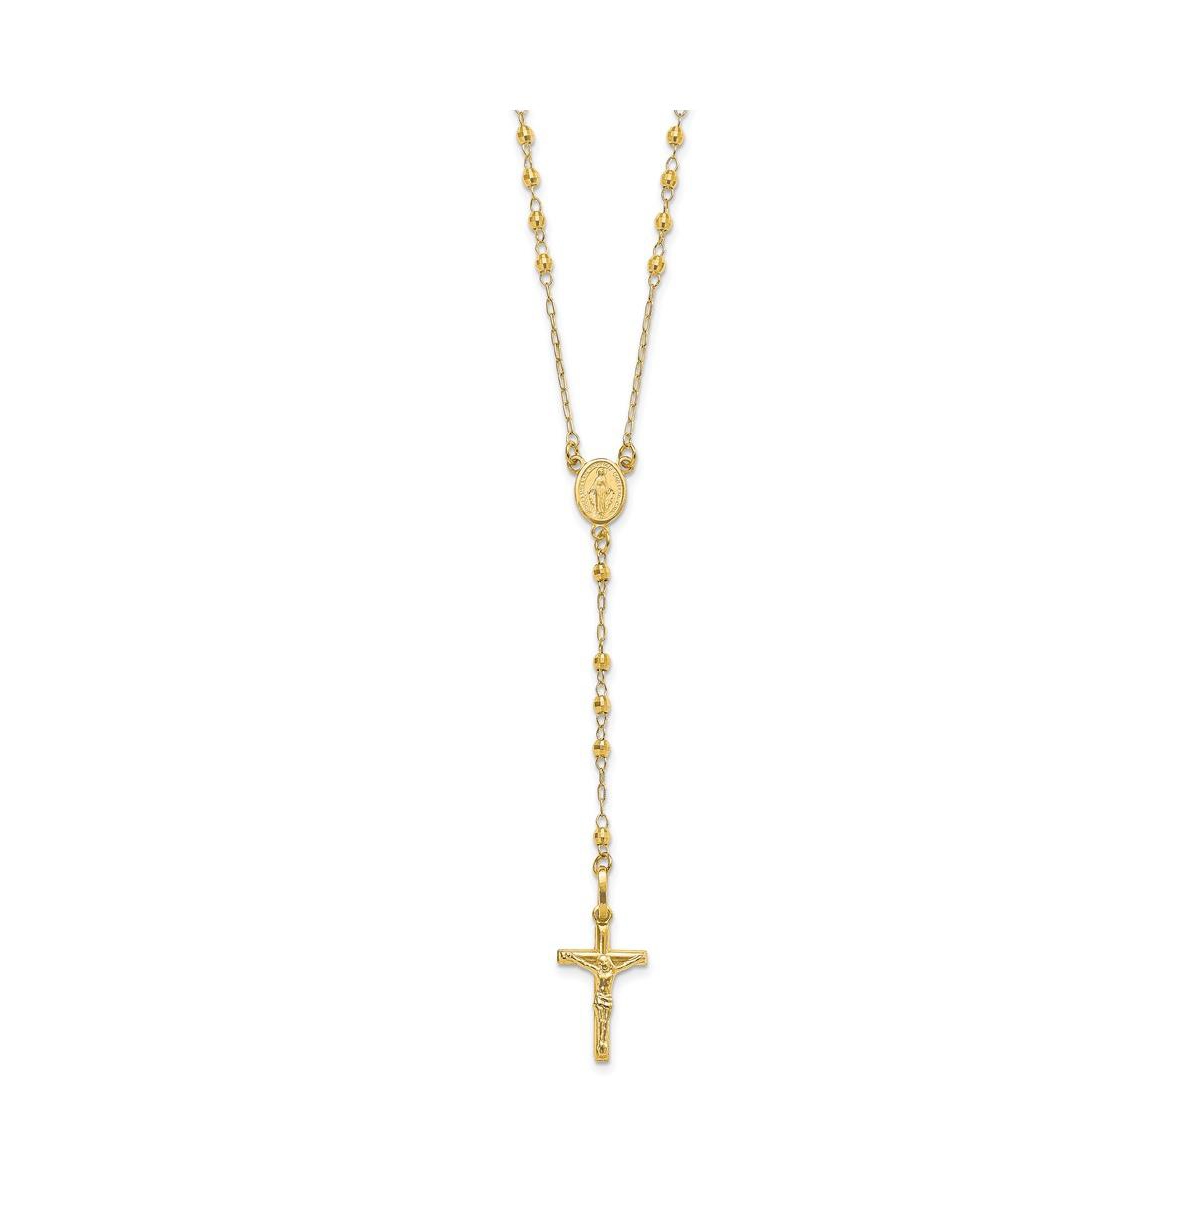 14K Yellow Gold Polished Faceted Beads Rosary Pendant Necklace 24" - Gold